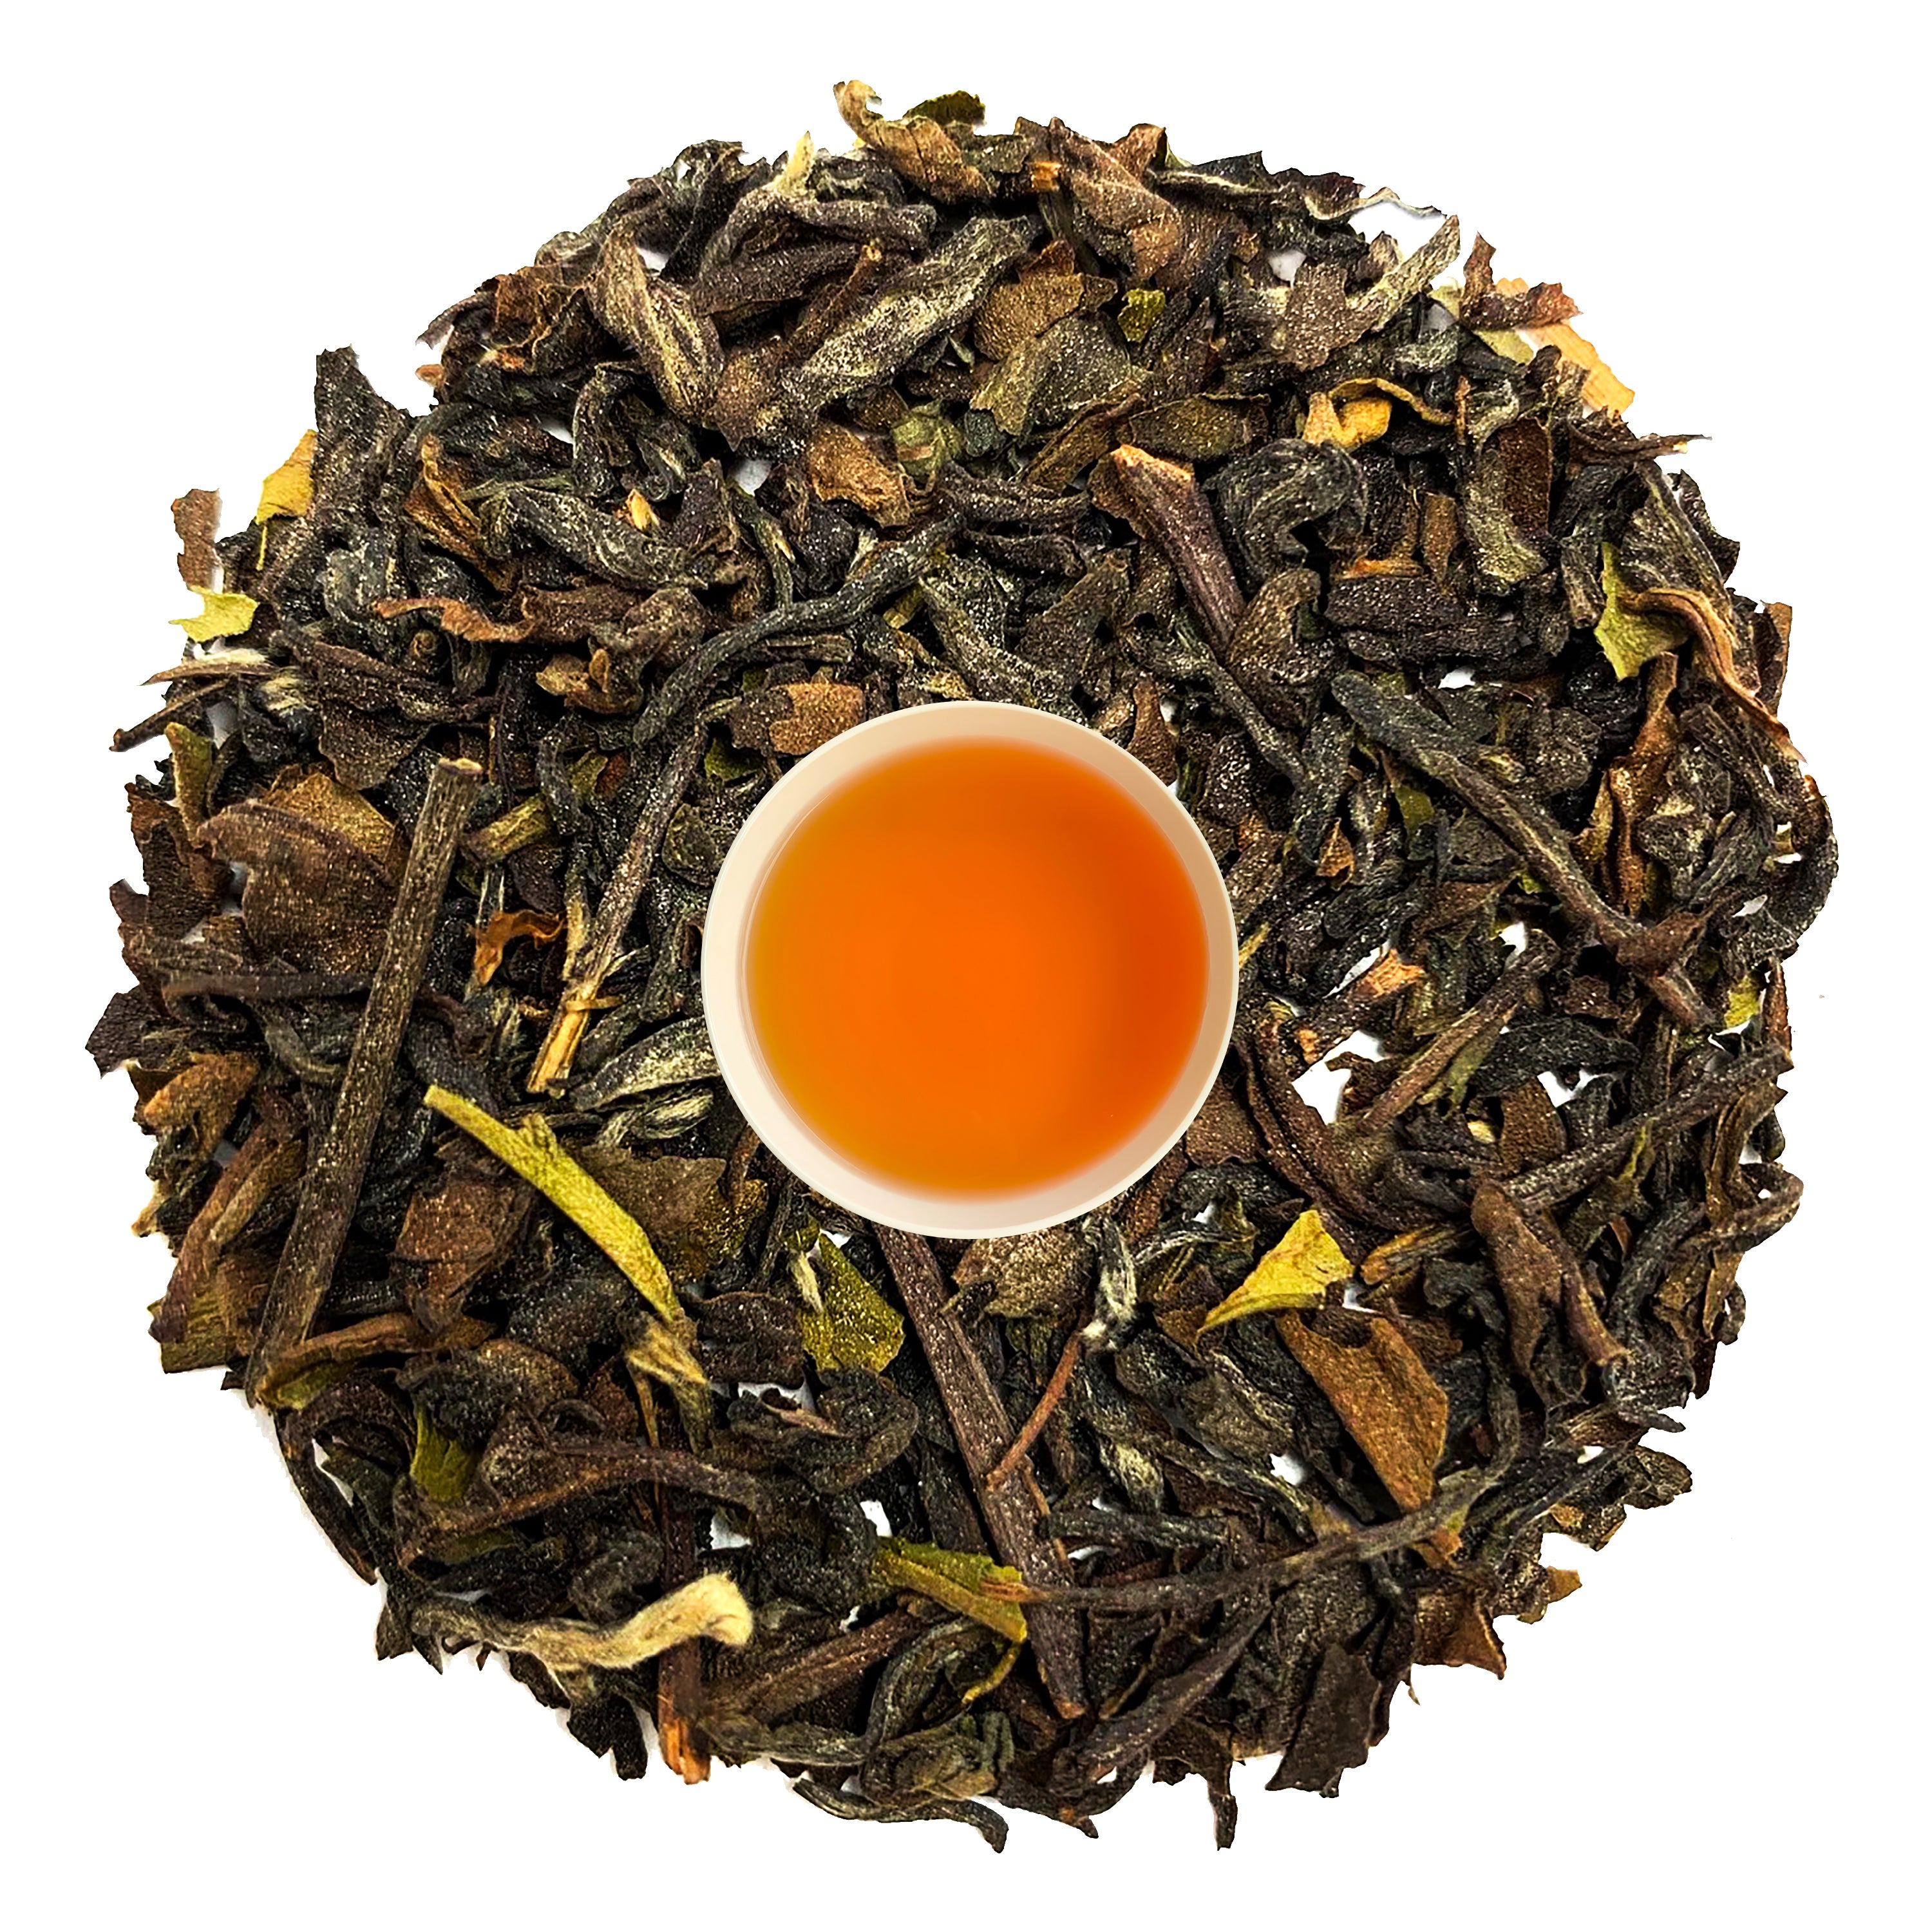 This Ilam Black Tea blended with the flavorful Himalayan Cardamom spice is one of our most versatile teas. This tea can be served just by itself , or makes great Chai Tea (hot or Iced). 